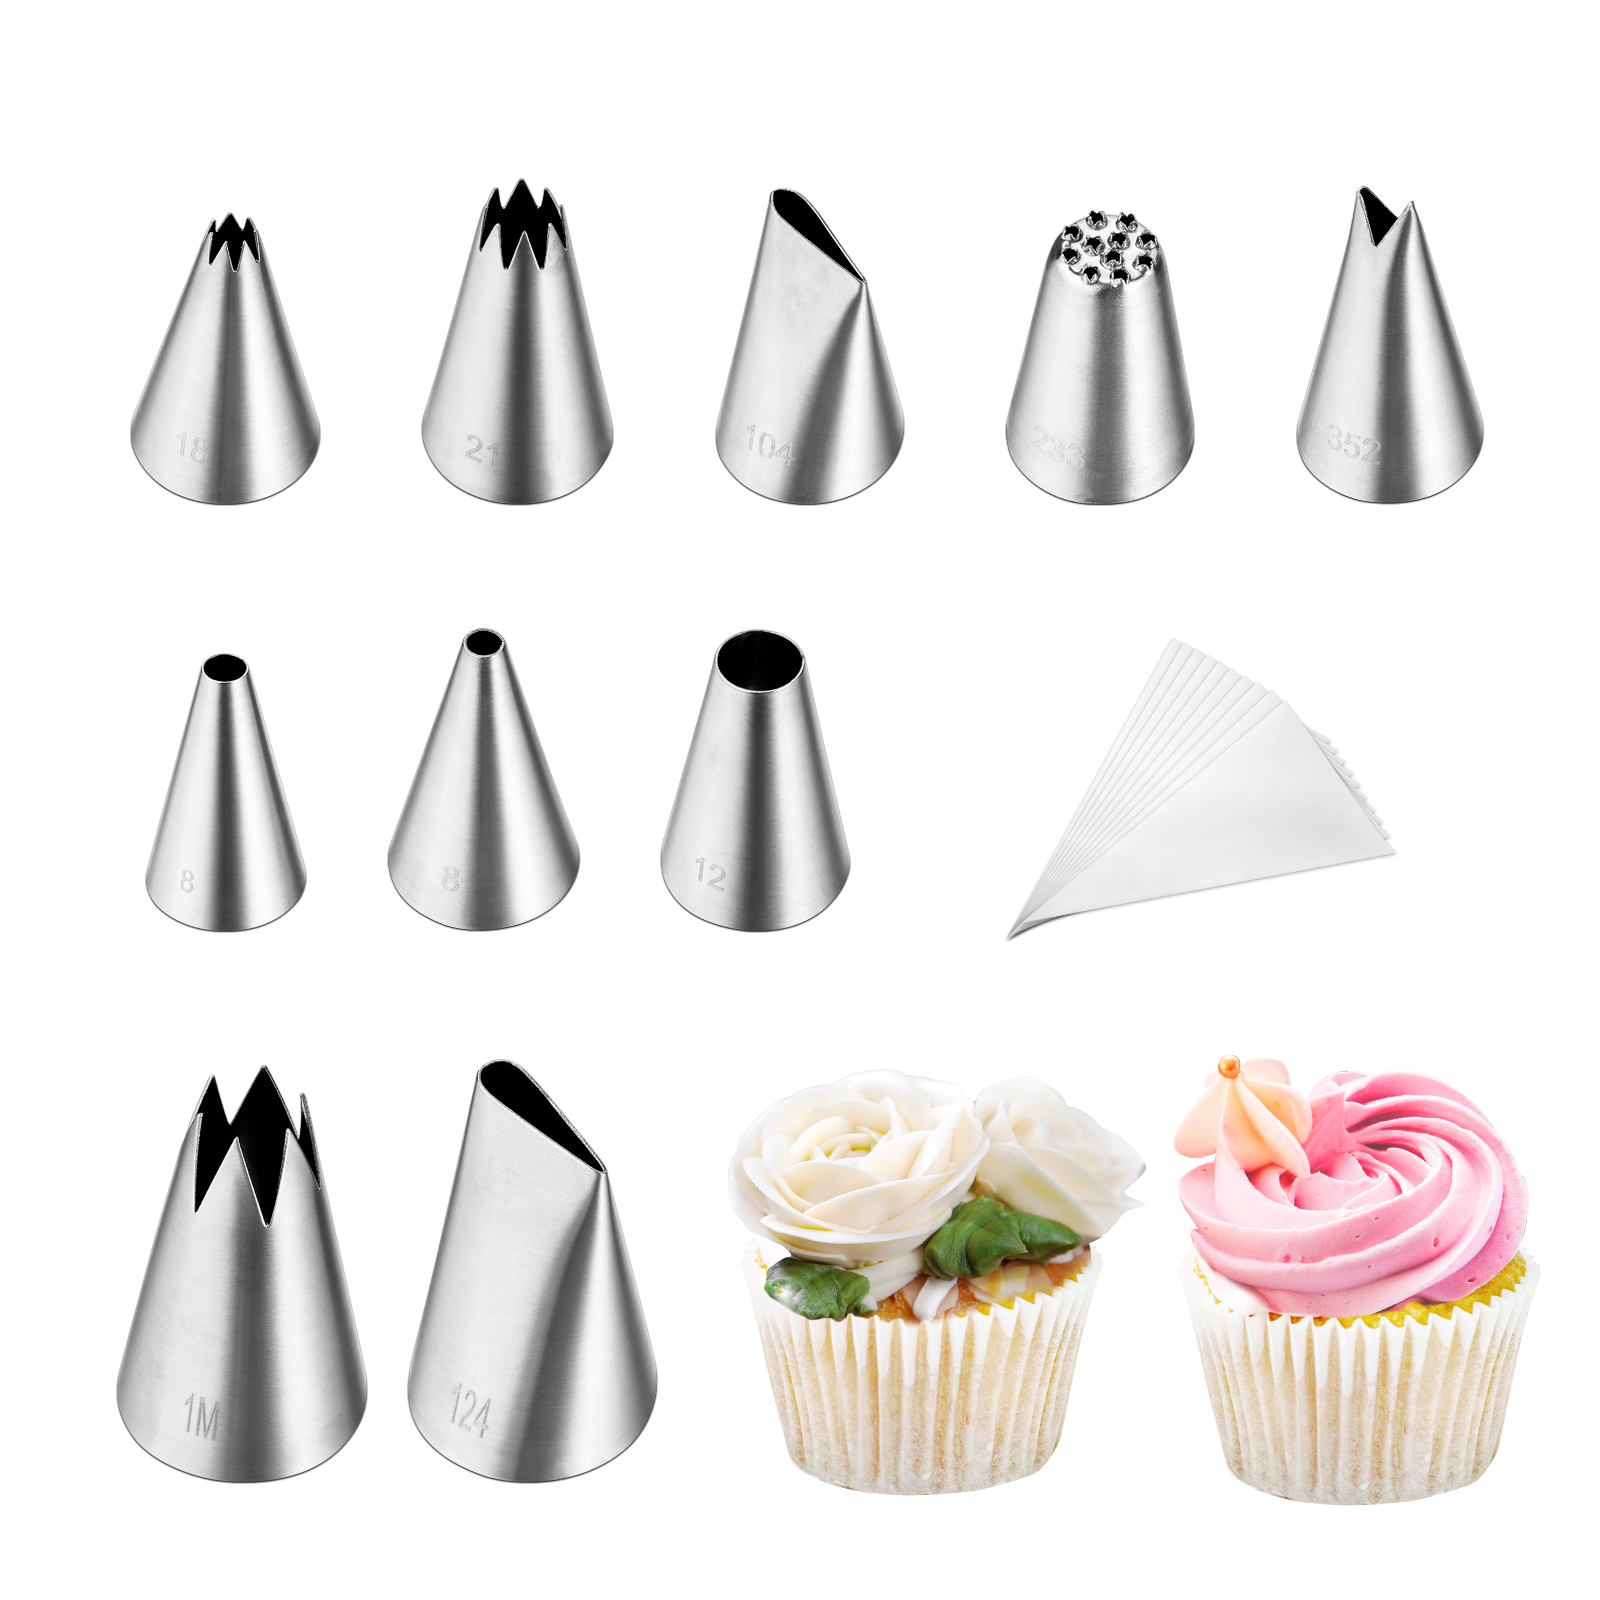 Kasmoire Cake Decorating Piping Tip and Bags Starter Set 8-Piece